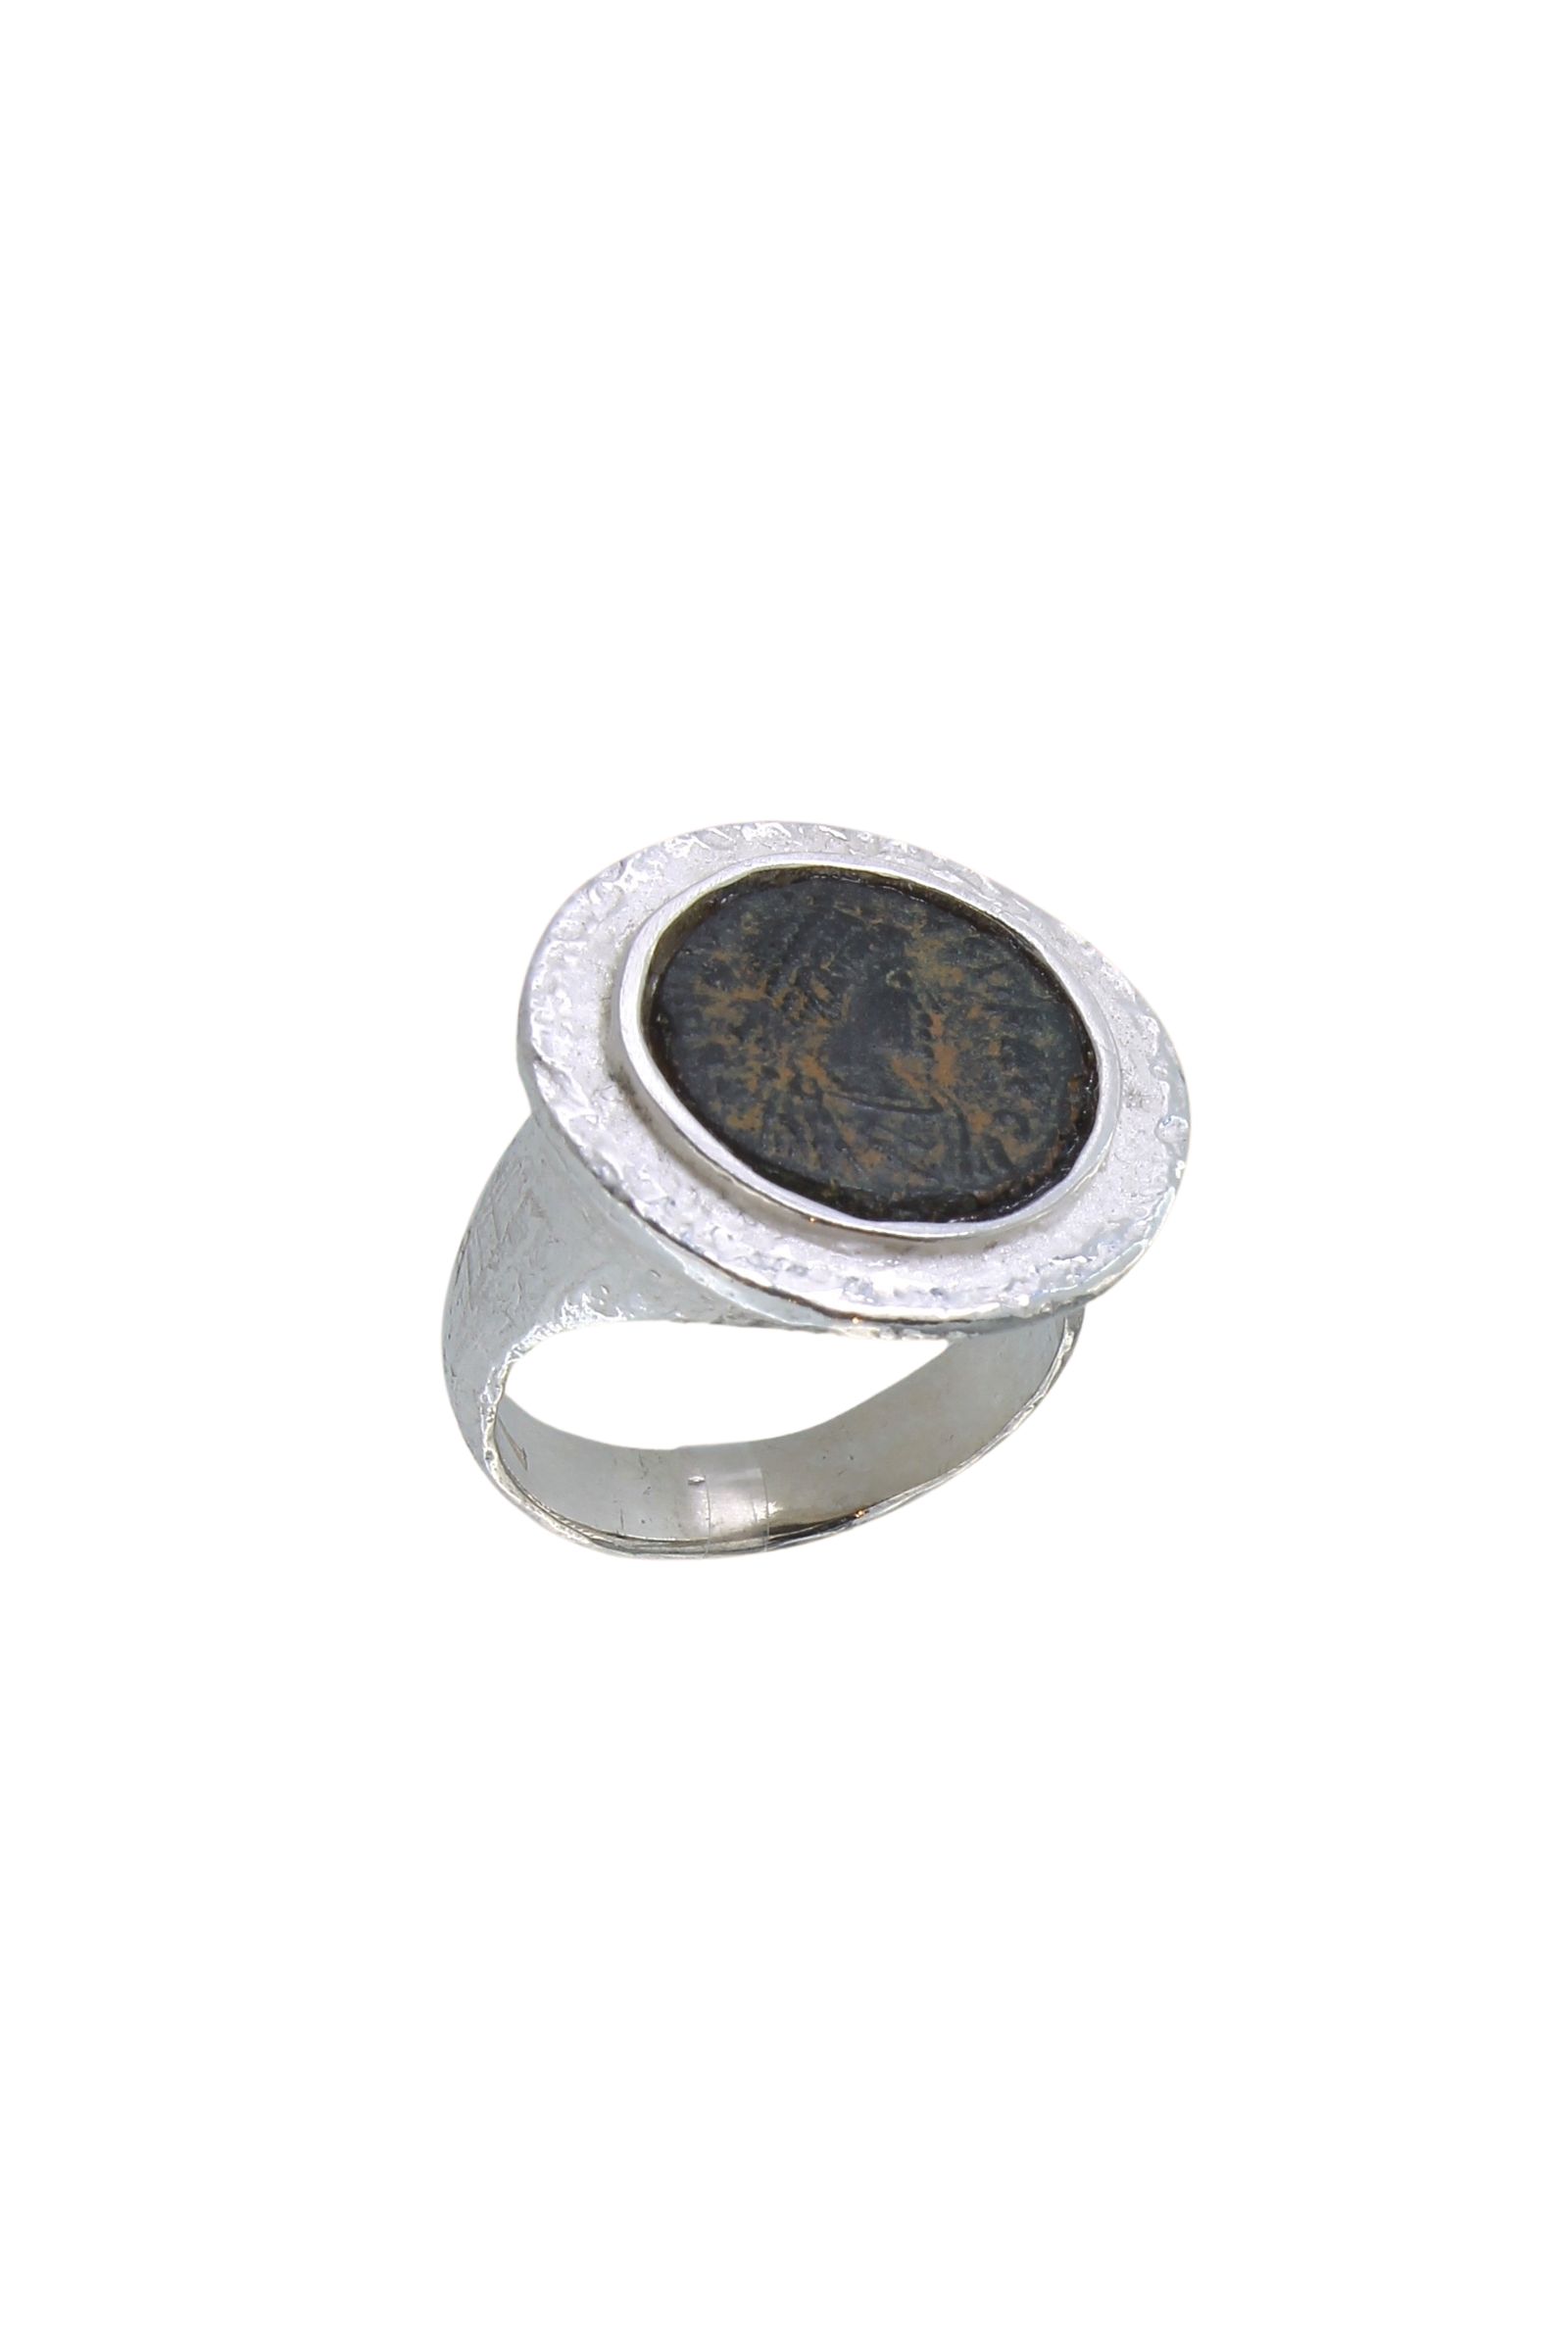 AE701-Sterling-Silver-925-Roman-Coin-Ring-1_